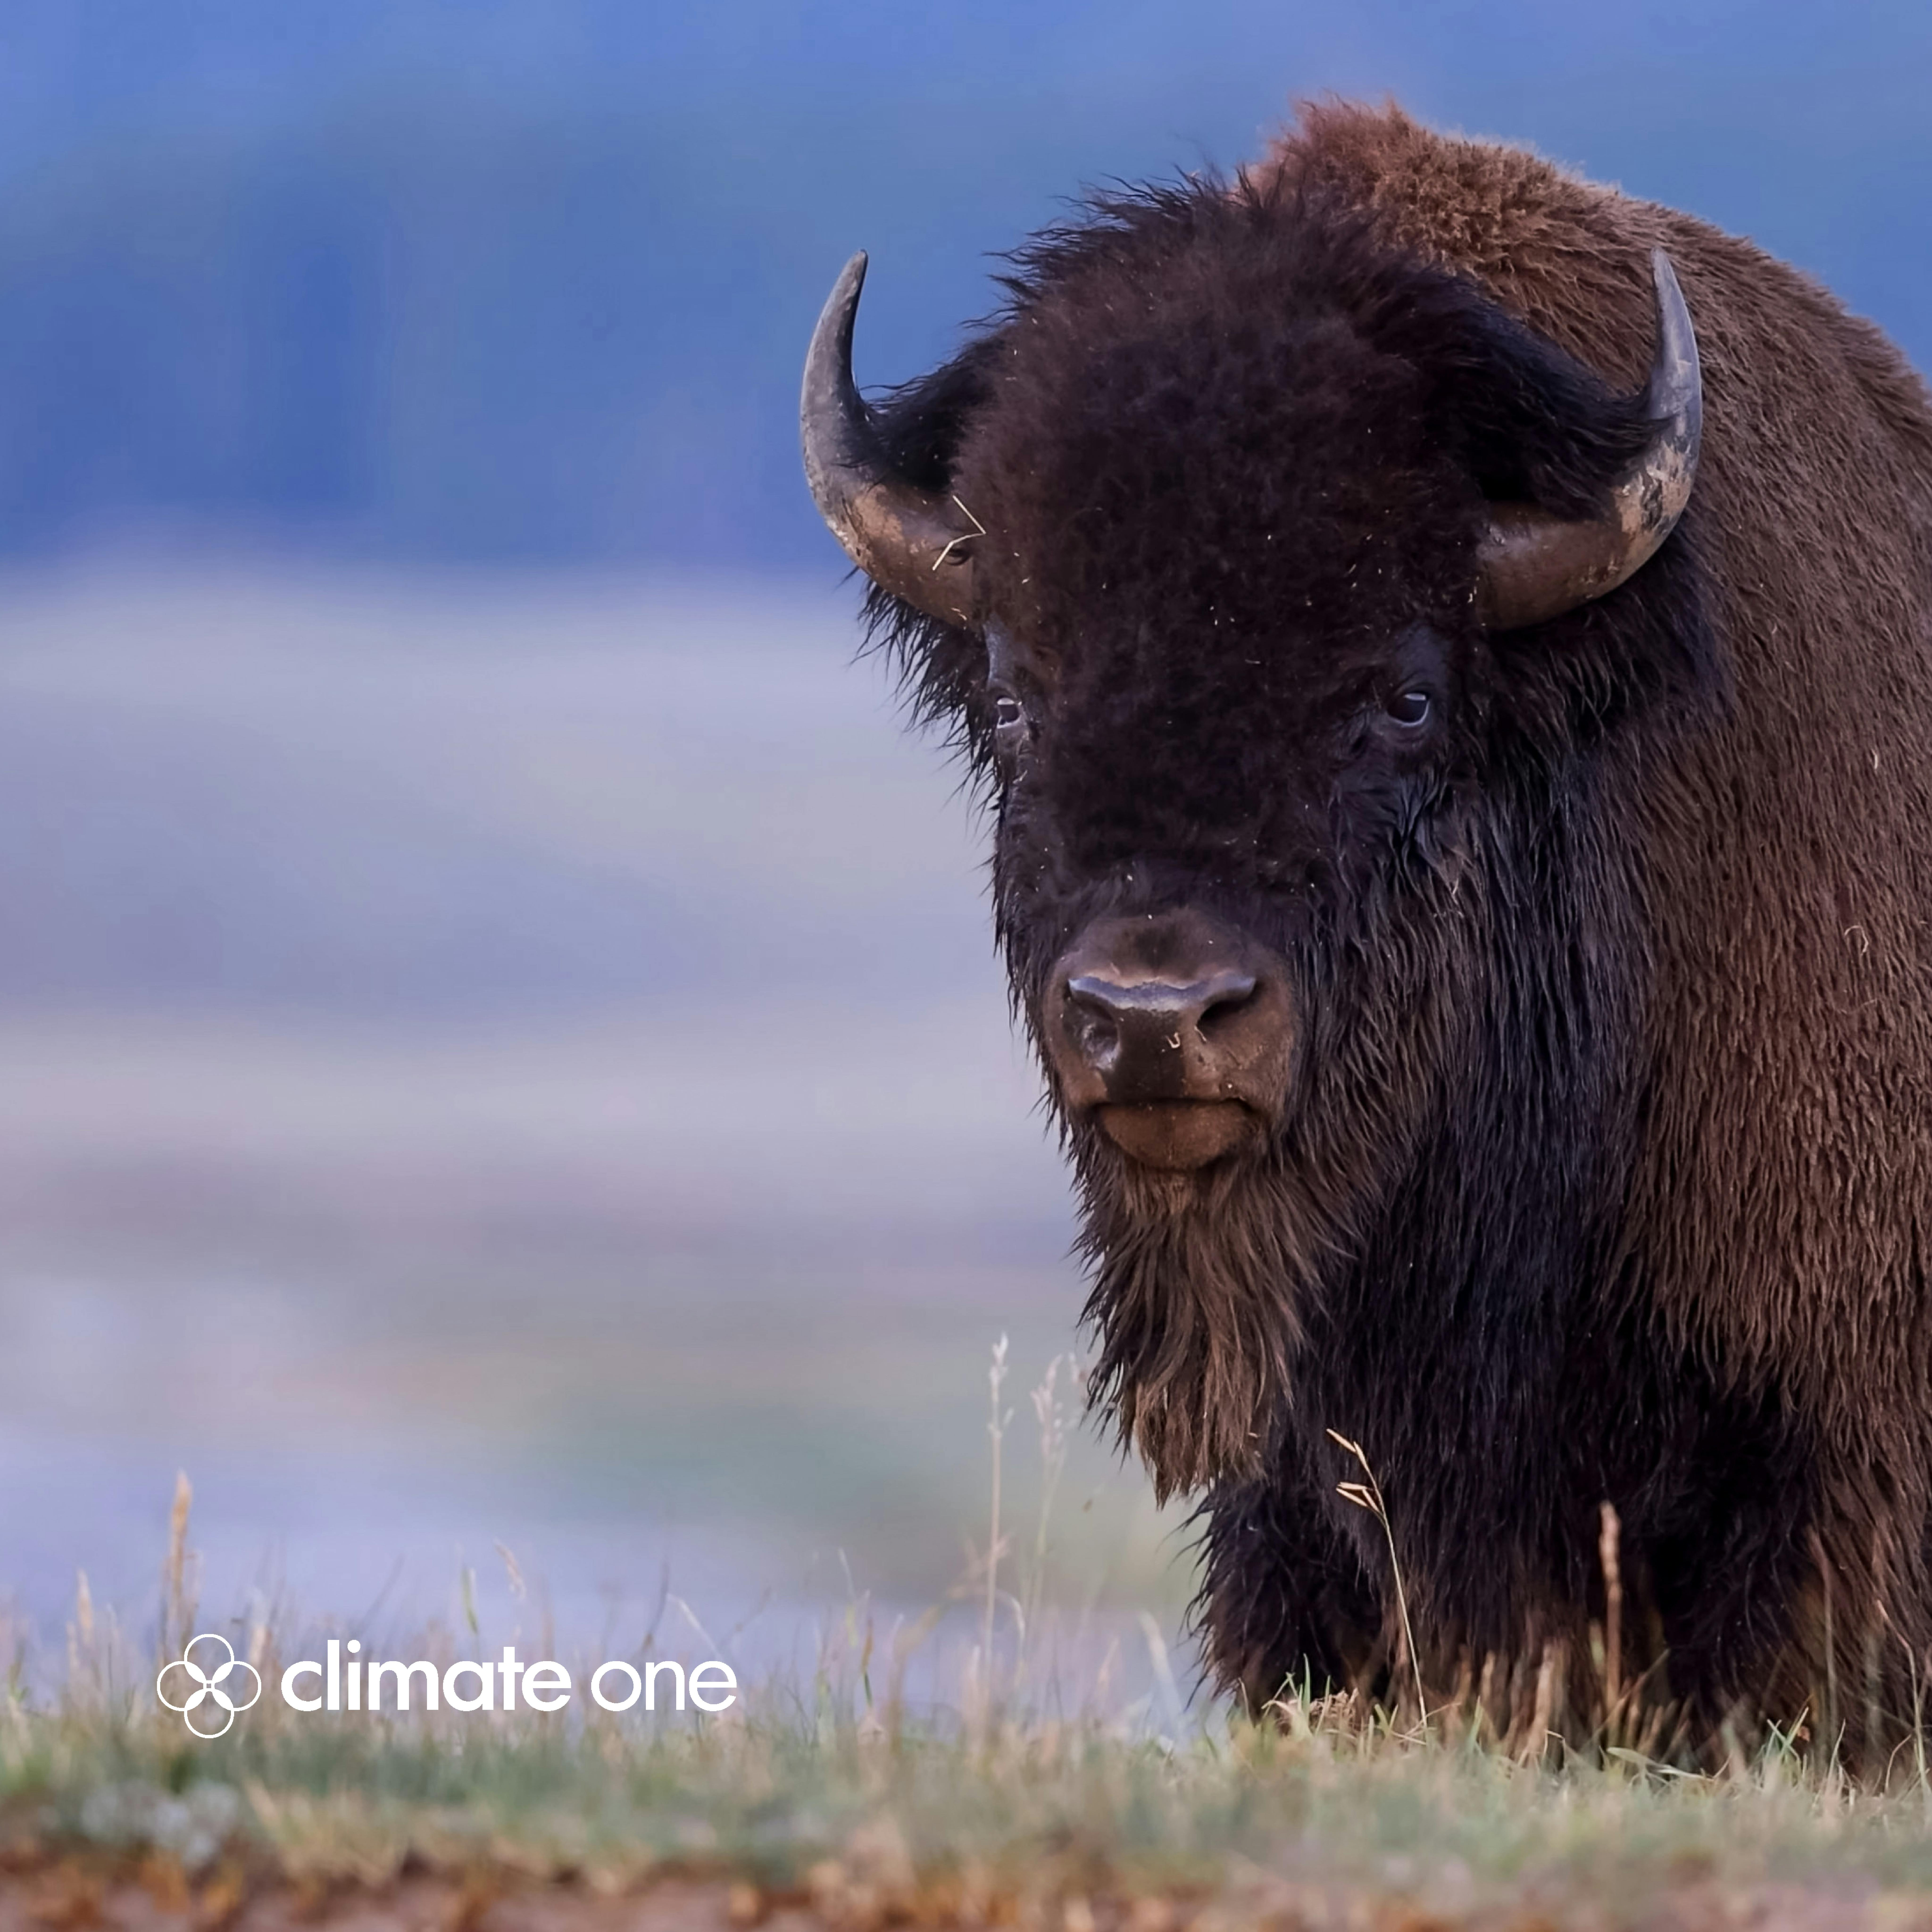 CLIMATE ONE: Ken Burns, Rosalyn LaPier and The American Buffalo